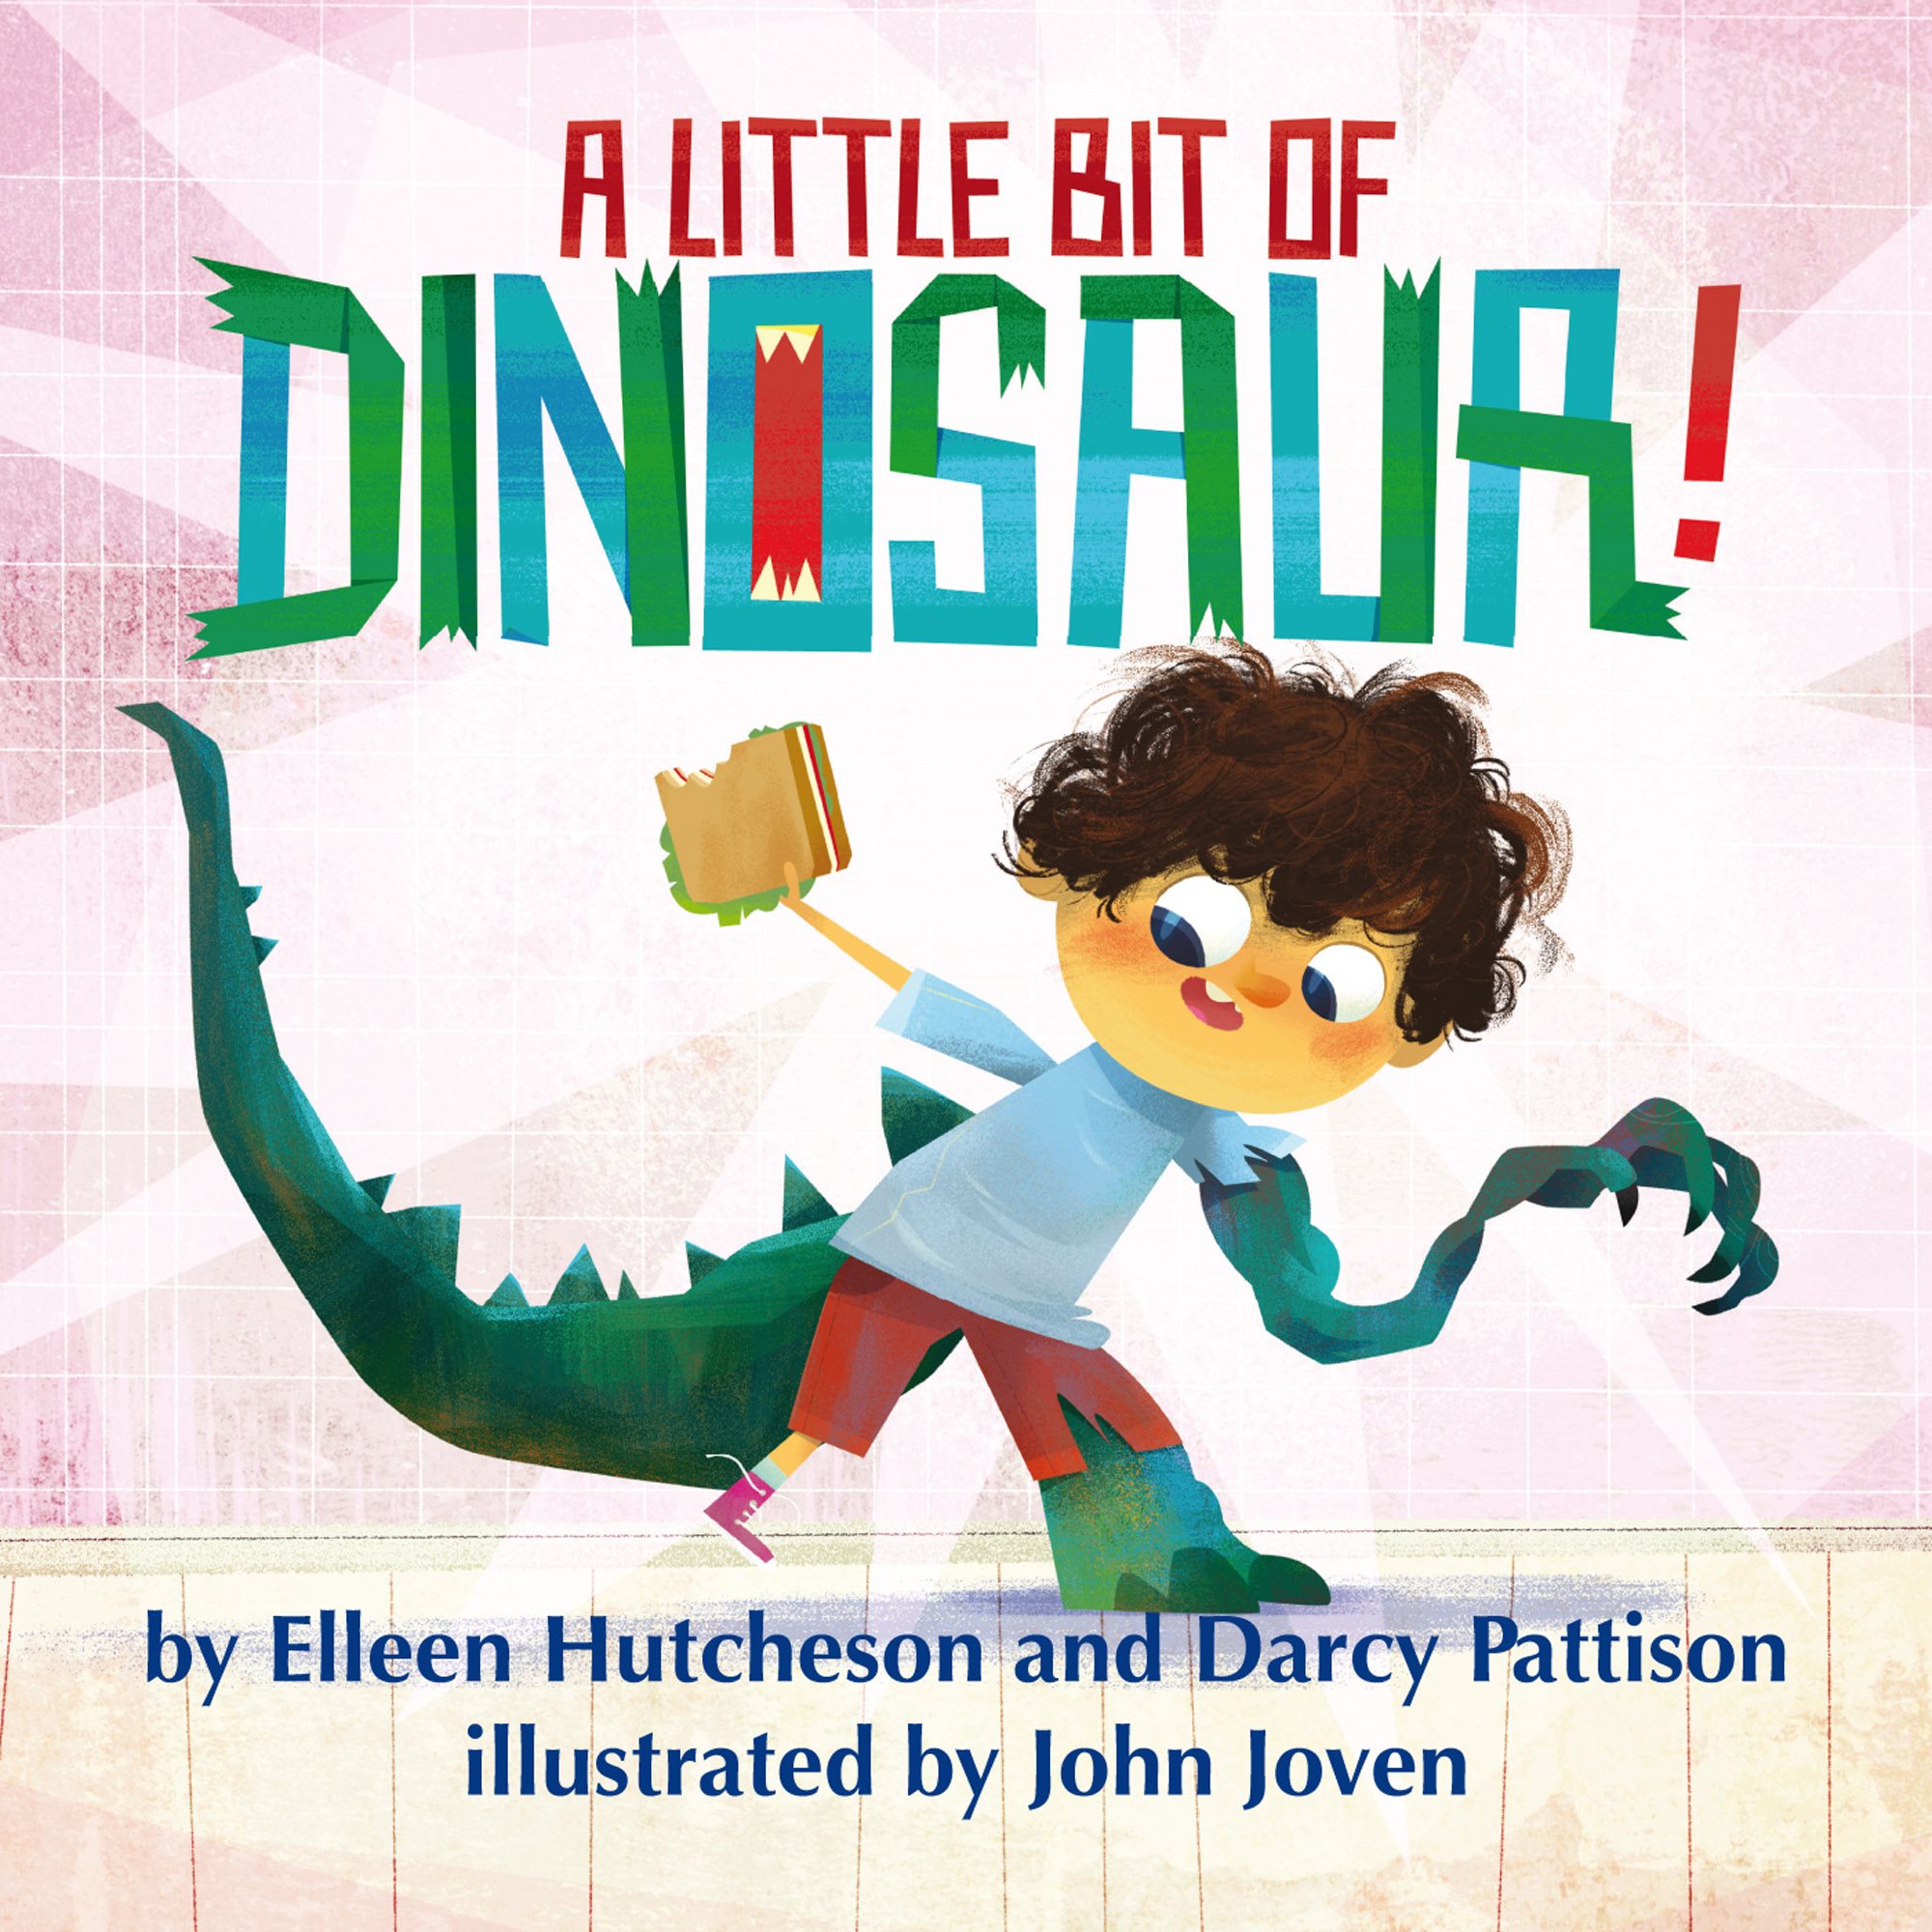 A Little Bit of Dinosaur by Elleen Hutcheson and Darcy Pattison illustrated by - photo 1